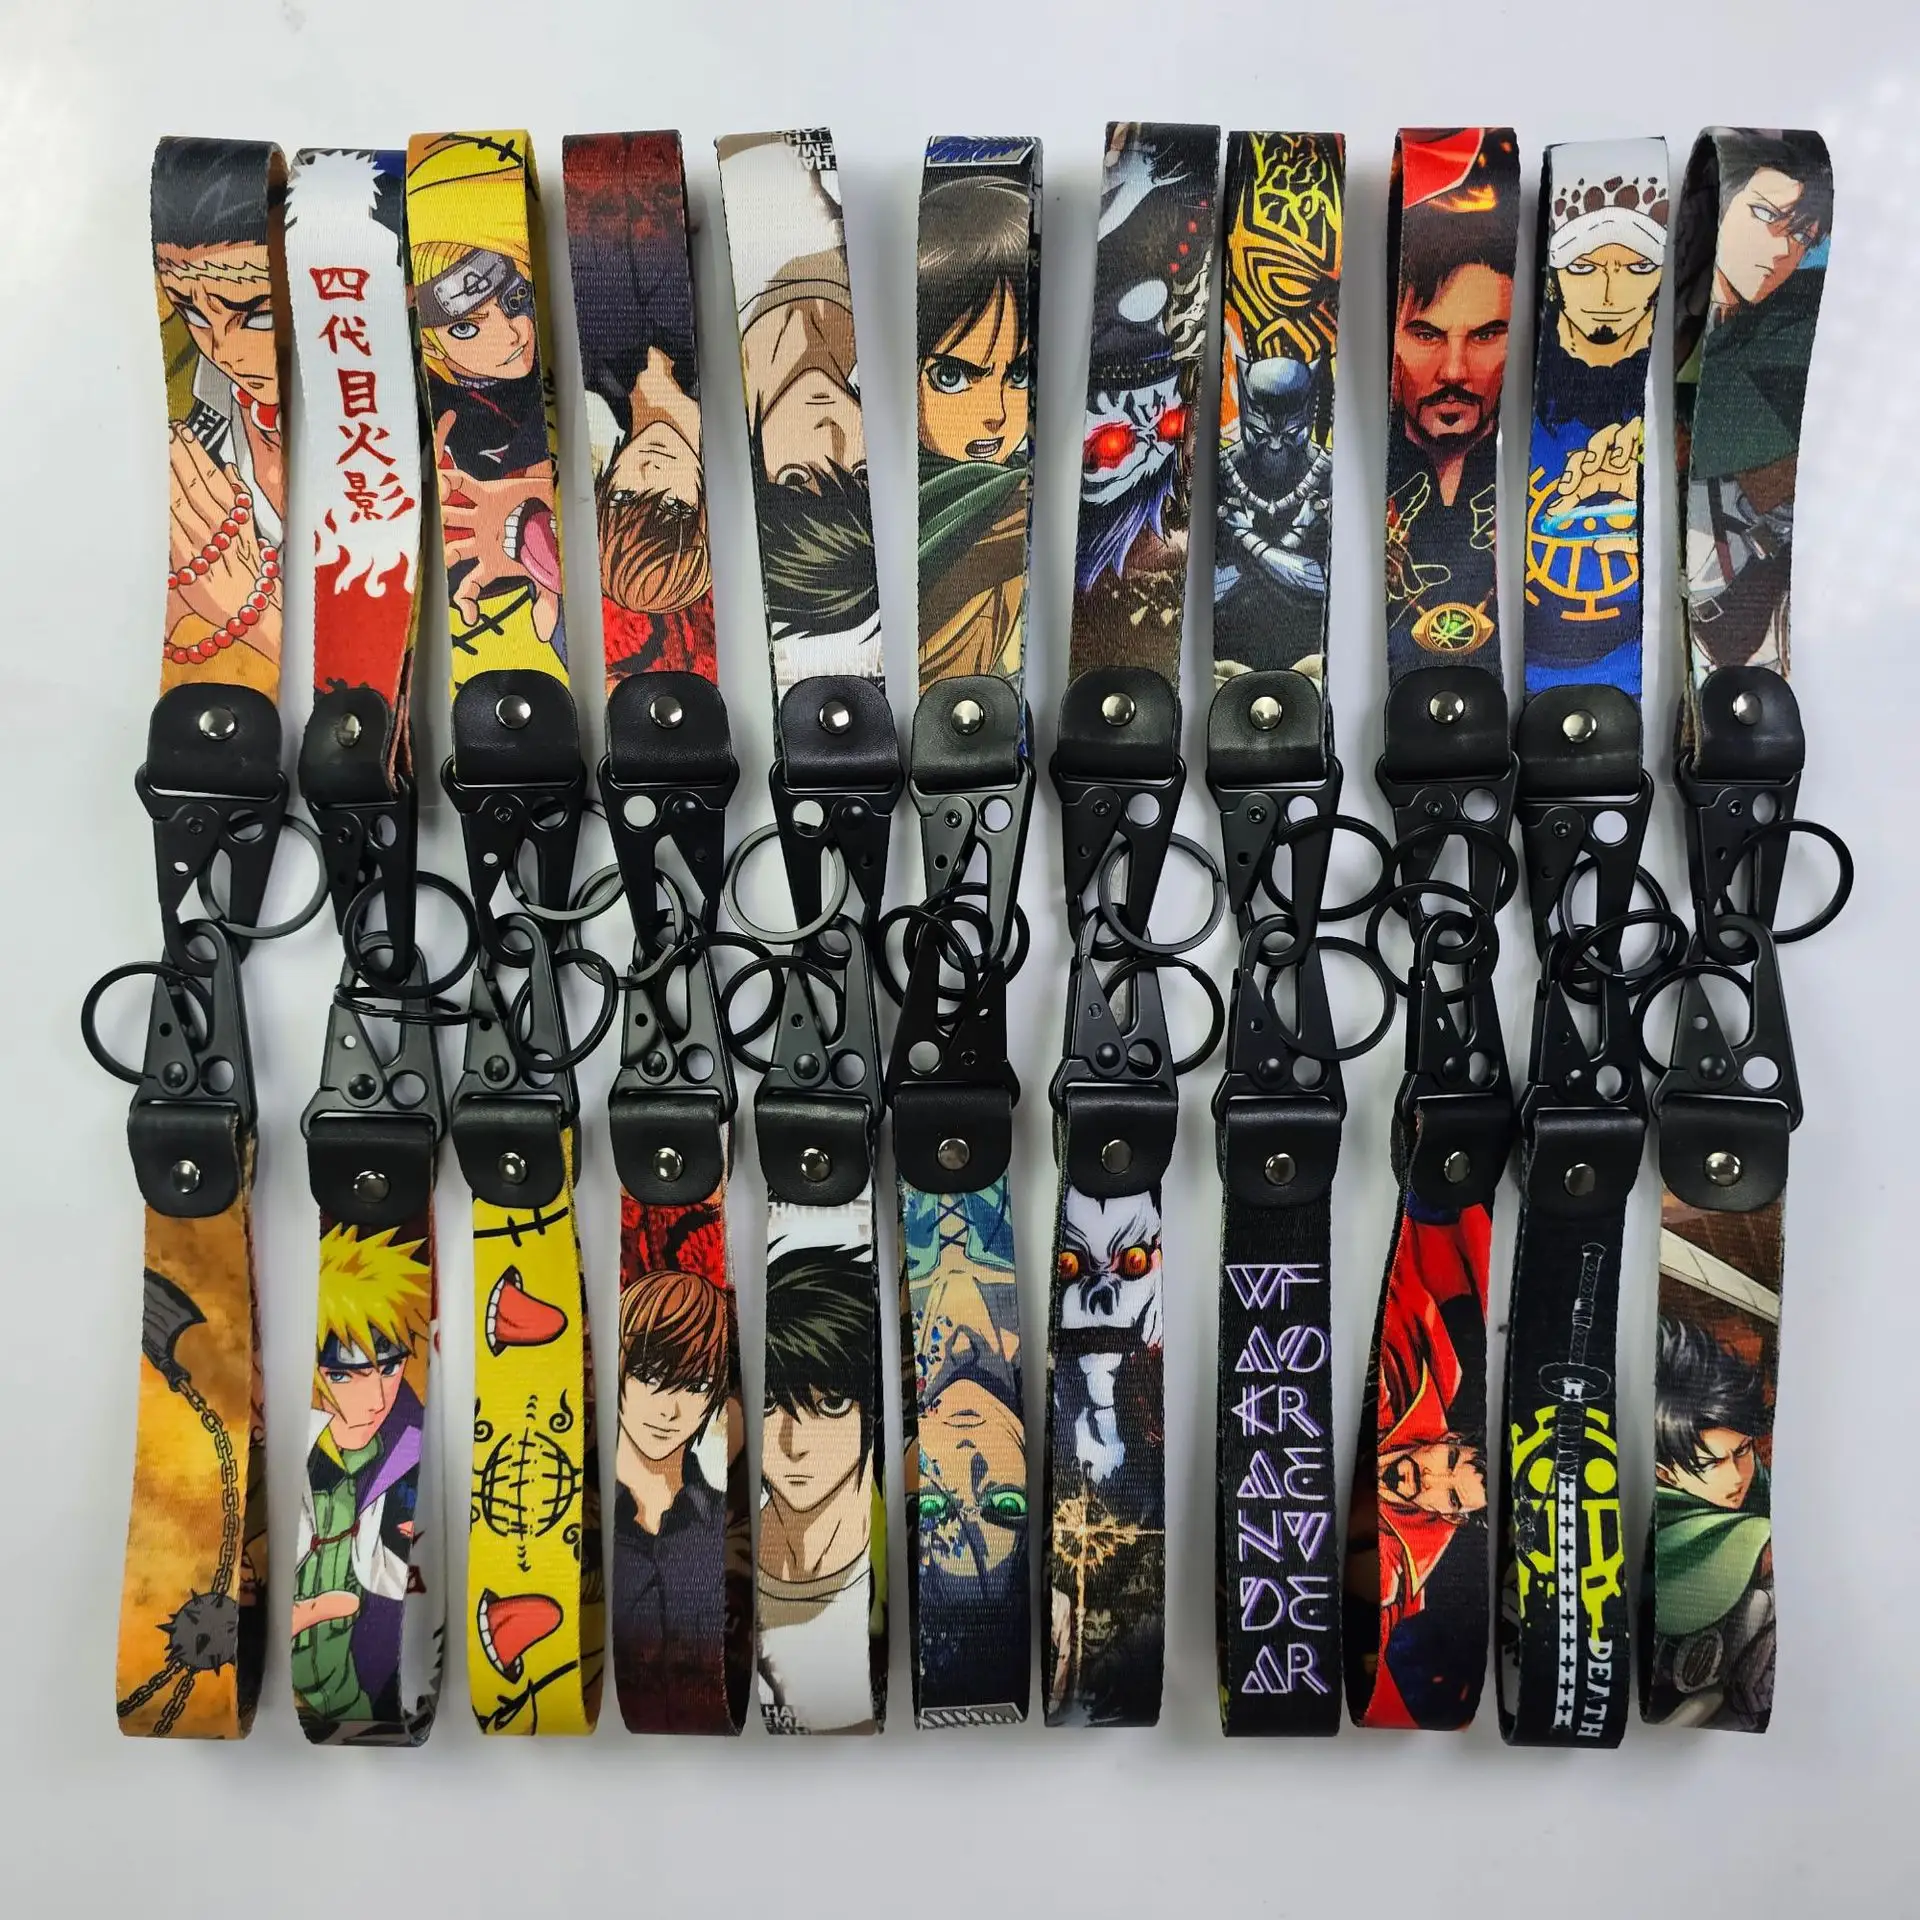 Japanese Anime Keychain Tags Anime Jet Tags Motorcycle Keychain Nylon for Car Motorcycles Demon Slayer Key Accessories